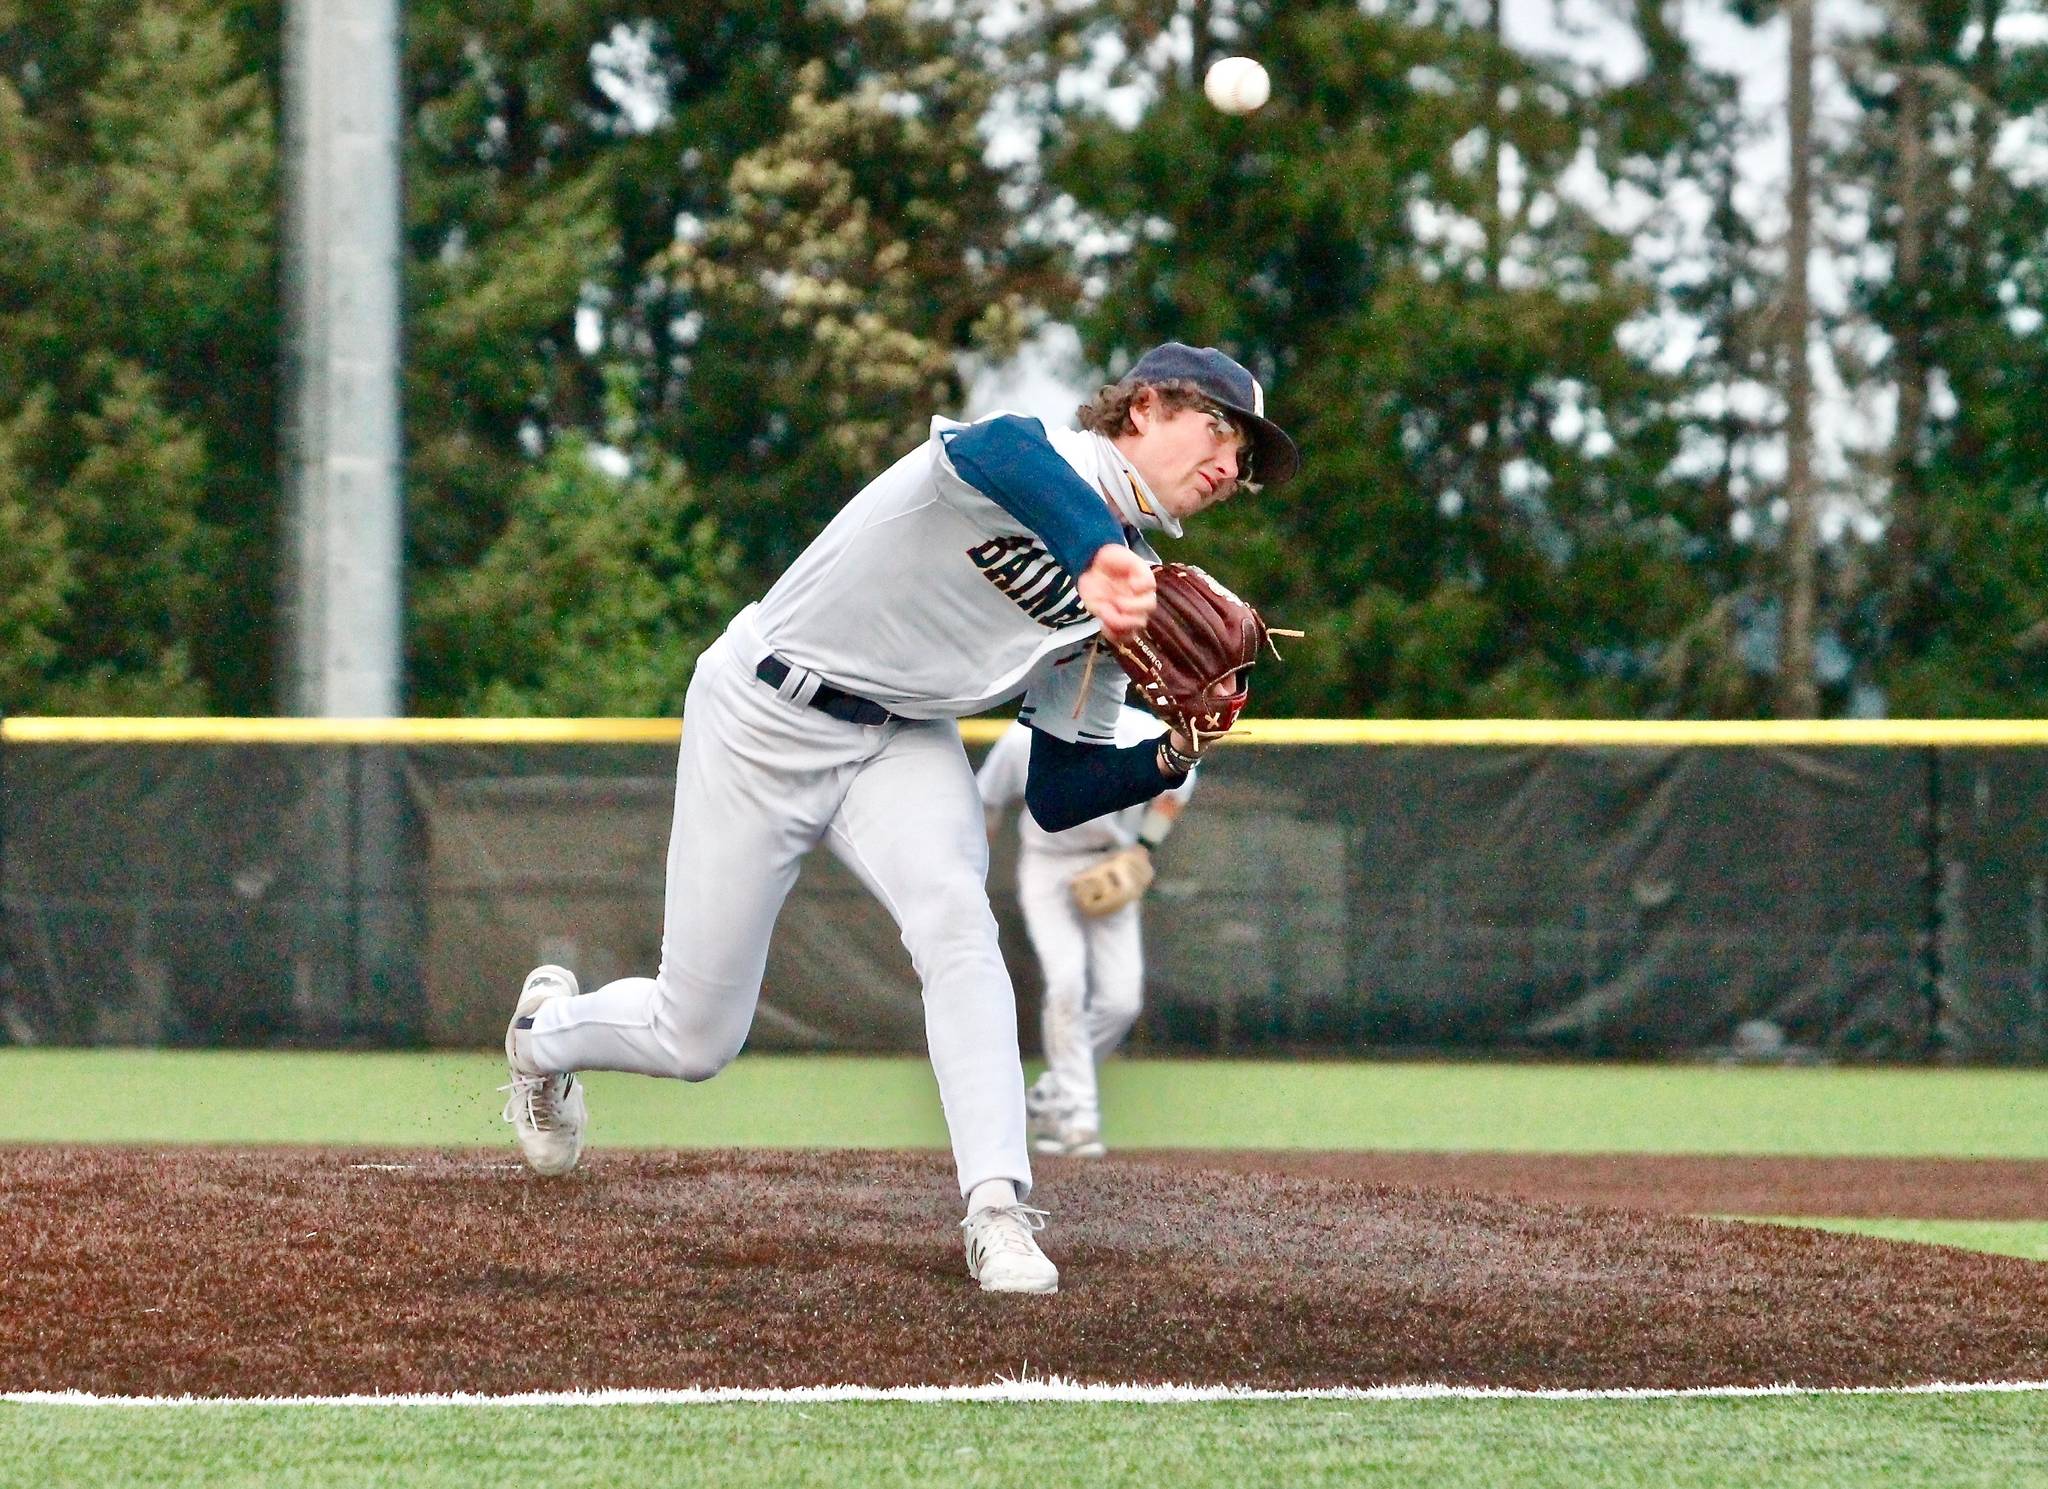 JR Ritchie stole the show in the championship game with a no-hitter and 18 strikeouts against Central Kitsap. (Mark Krulish/Kitsap News Group)